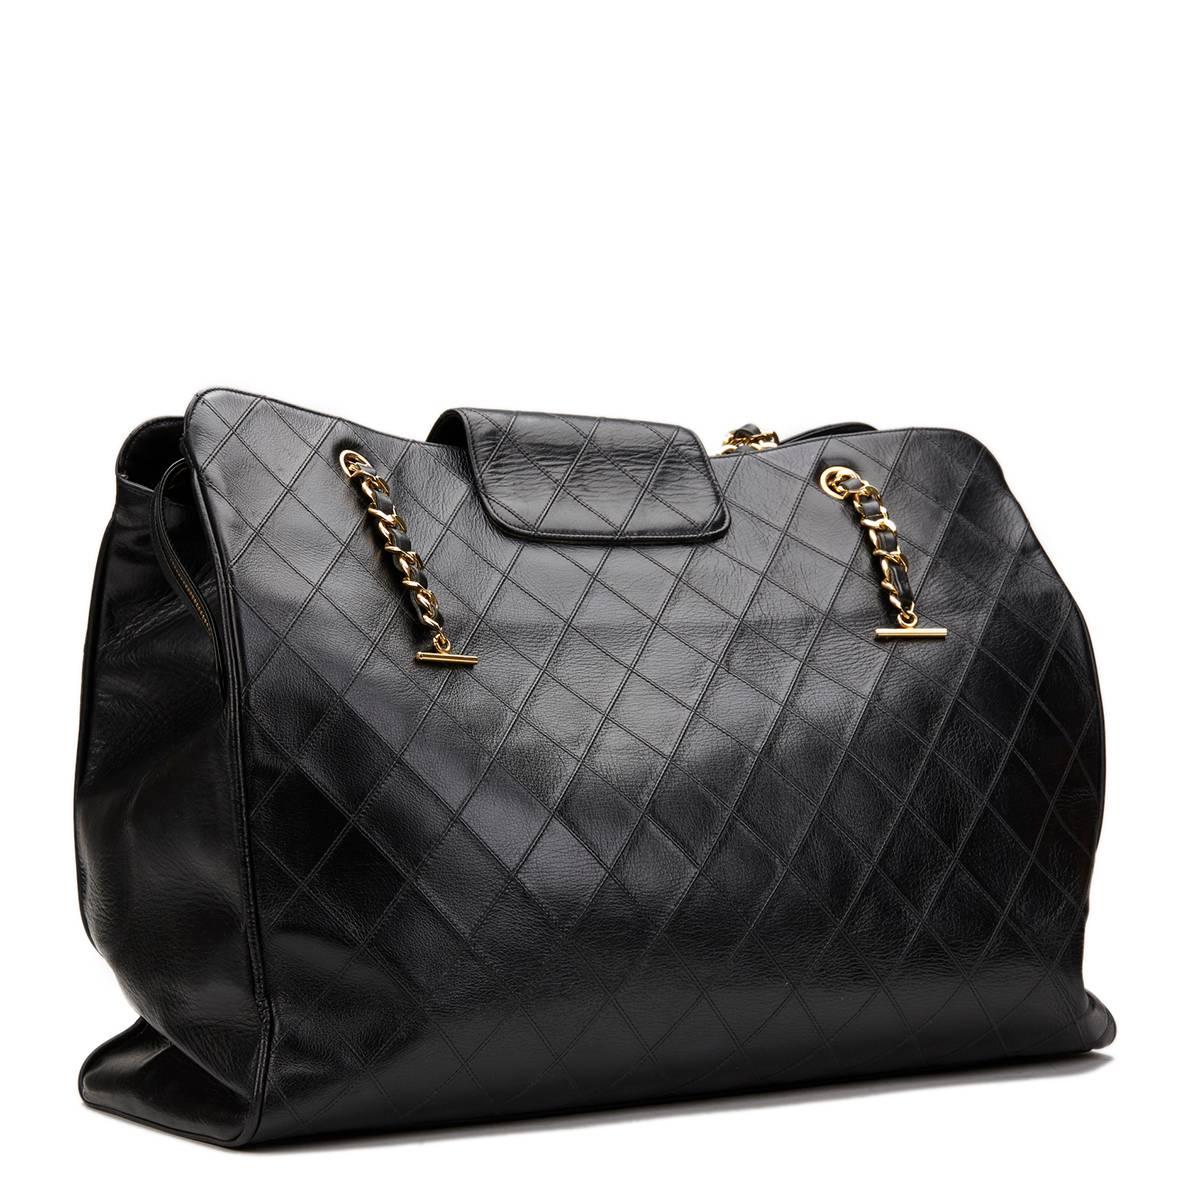 CHANEL
Black Quilted Lambskin Vintage Jumbo Supermodel Tote

This CHANEL Jumbo Supermodel Tote is in Excellent Pre-Owned Condition accompanied by Authenticity Card. Circa 1988. Primarily made from Lambskin Leather complimented by Gold hardware. Our 